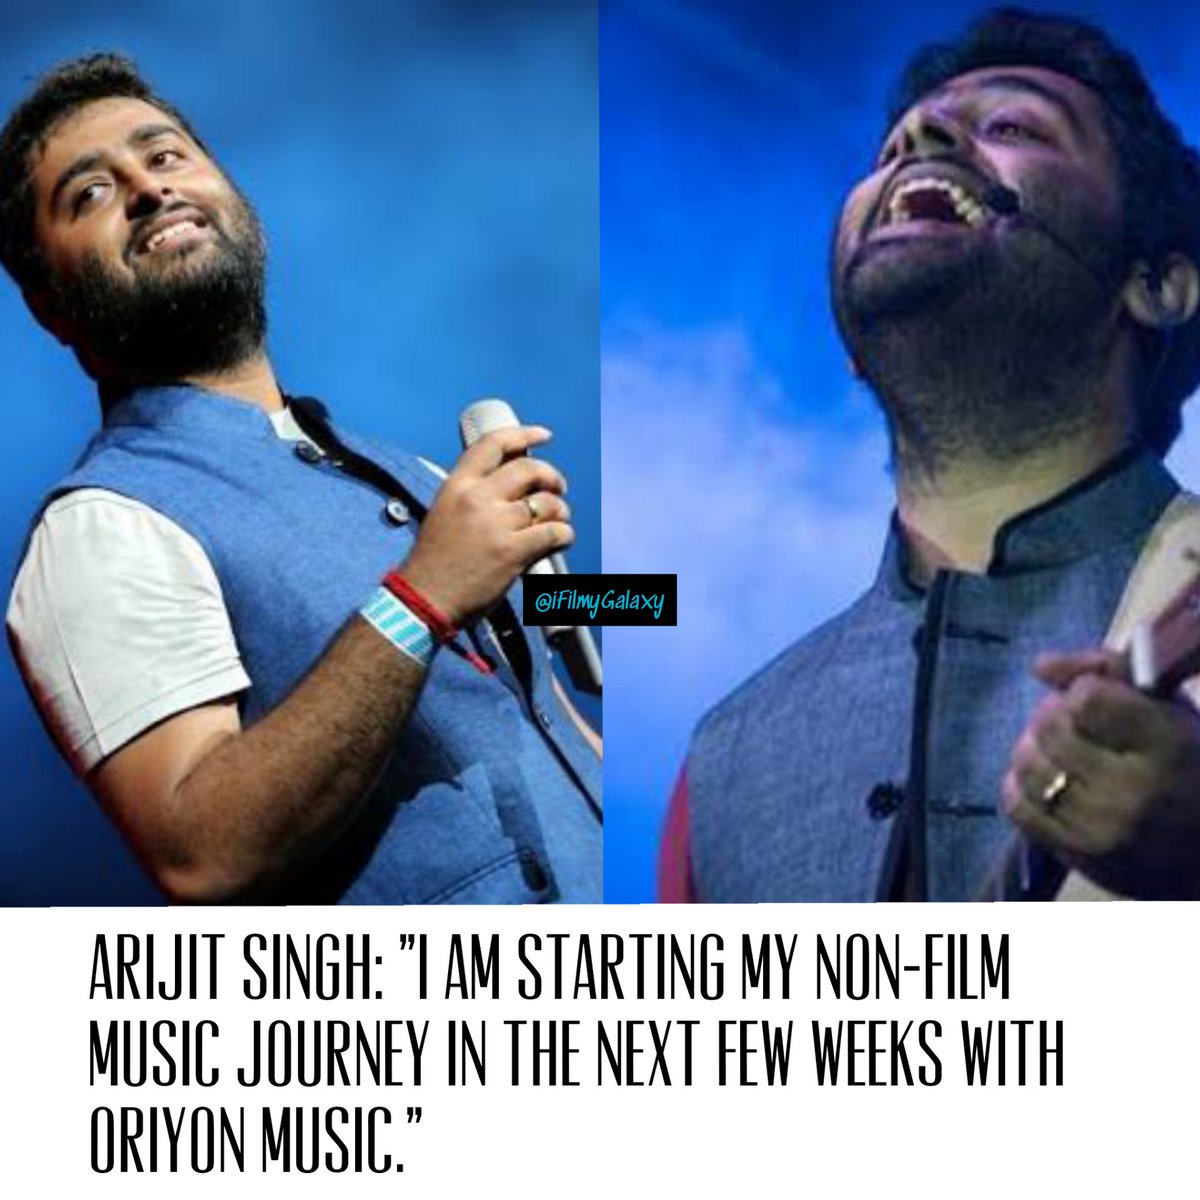 #ArijitSingh Makes An Exciting Announcement About Oriyon Music And His Non-Film Music, That Will Also Have Emerging Talents As Well

filmy-galaxy.com/2020/07/arijit…

@Atmojoarjalojo #OriyonMusic #ArijitSinghSongs #IndependentMusic